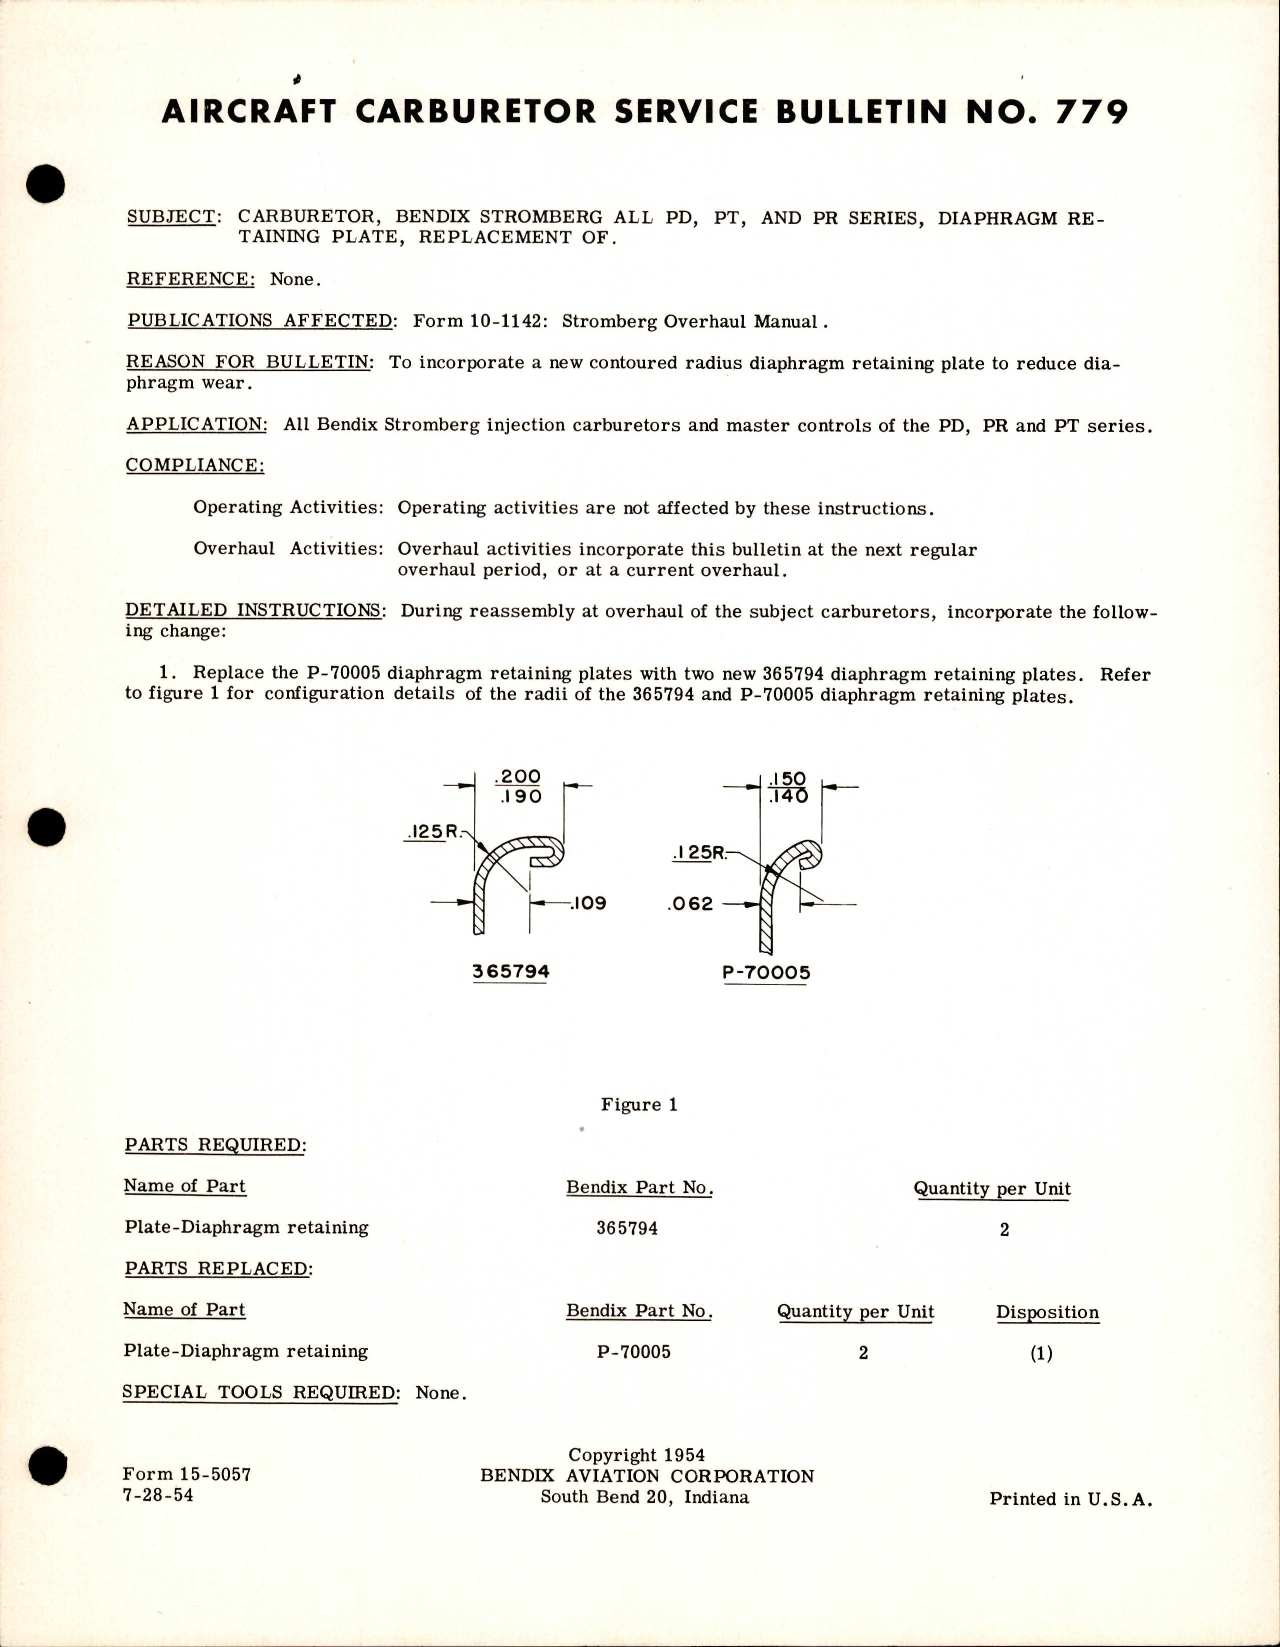 Sample page 1 from AirCorps Library document: Carburetor, Bendix Stromberg, All PD, PT, and PR Series, Diaphragm Retaining Plate, Replacement